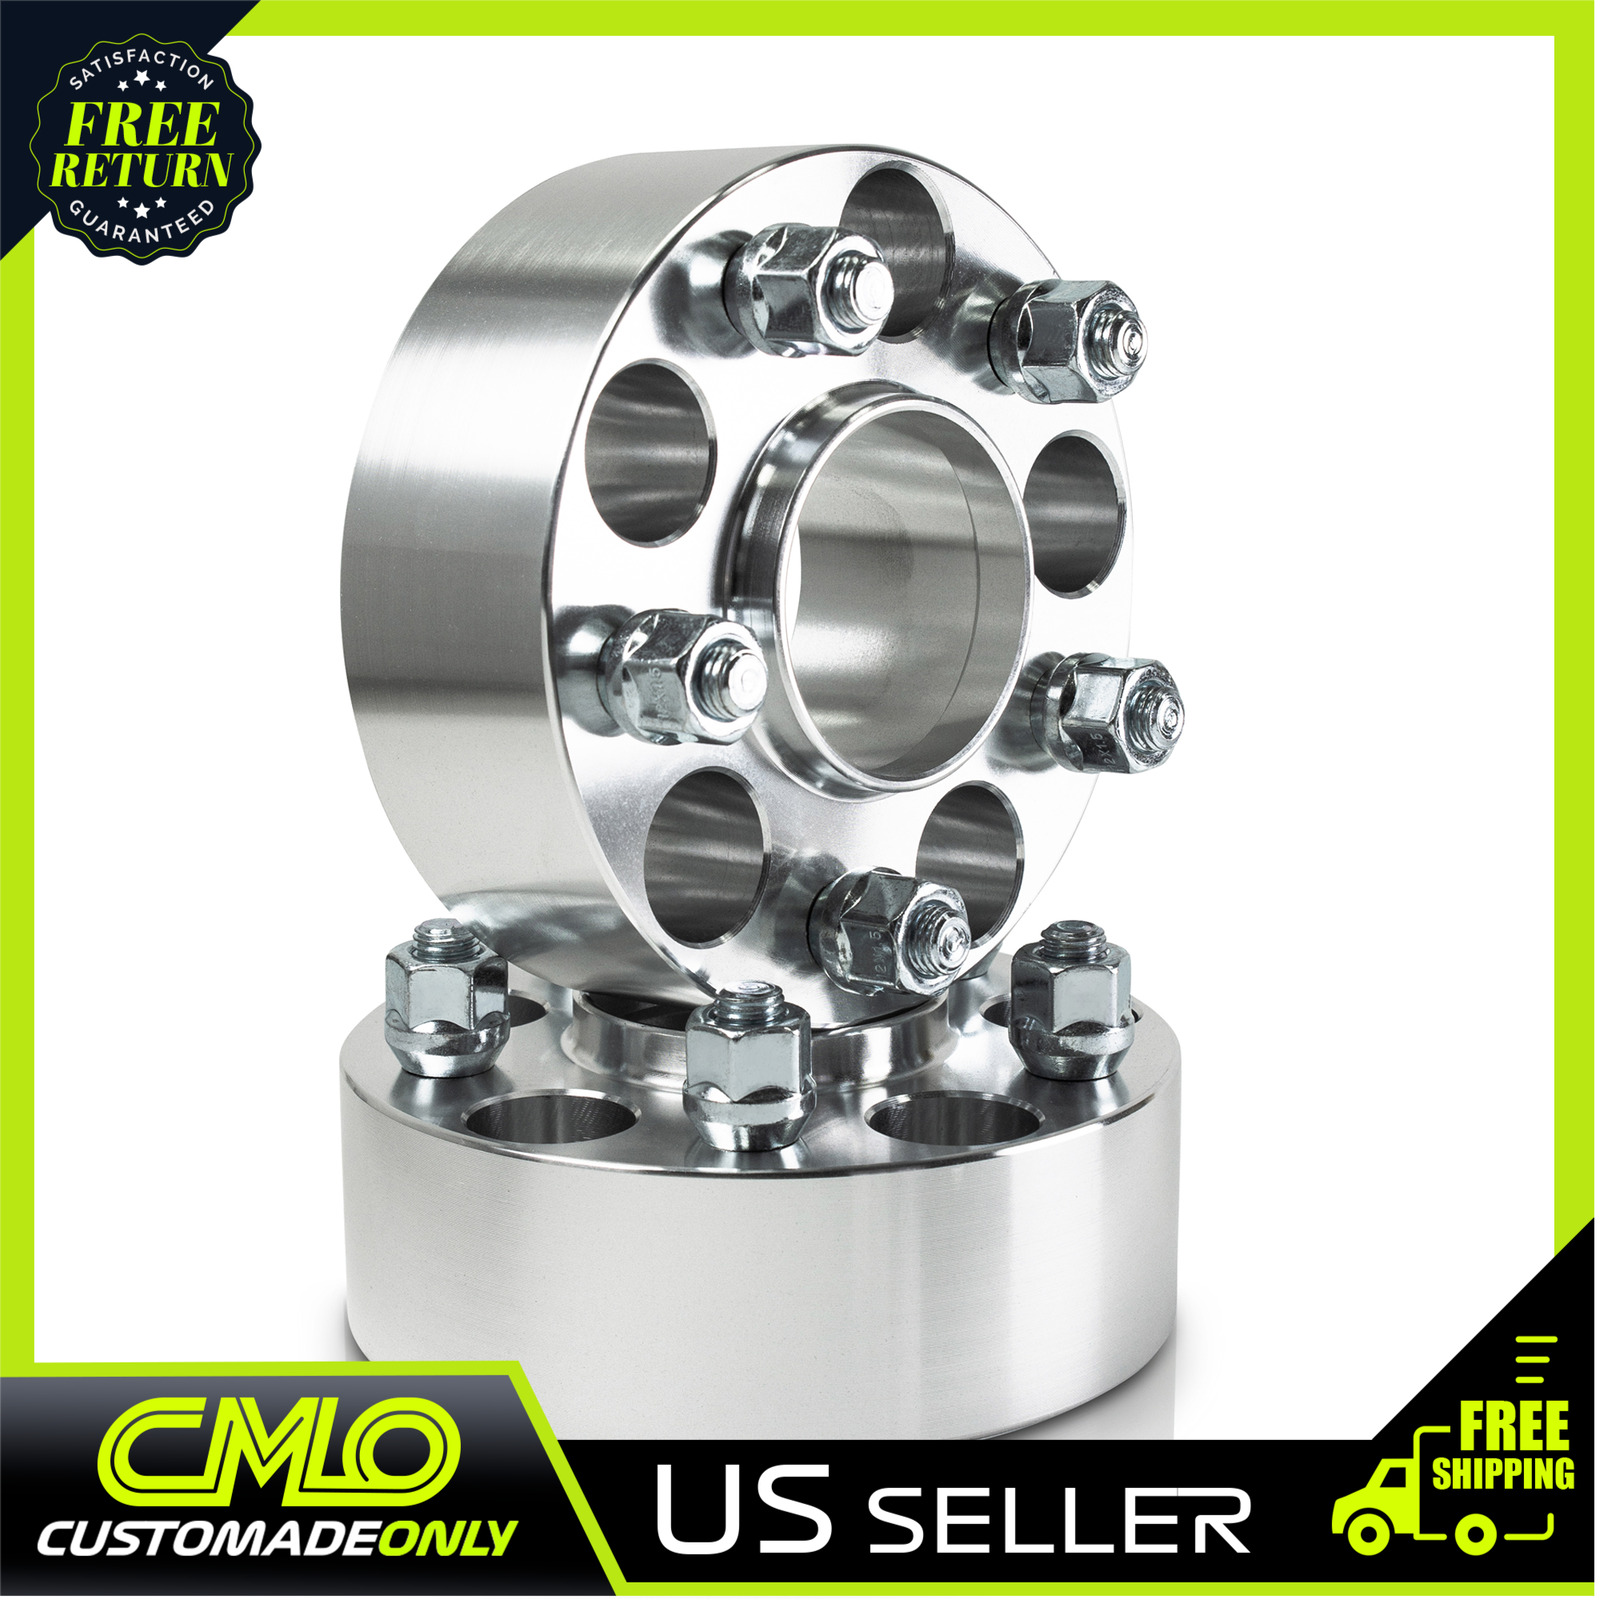 2X WHEEL SPACERS ¦ 5X114.3 TO 5X114.3 ¦ 12X1.5 ¦ 67.1 CB ¦ 50MM 2 INCH THICK